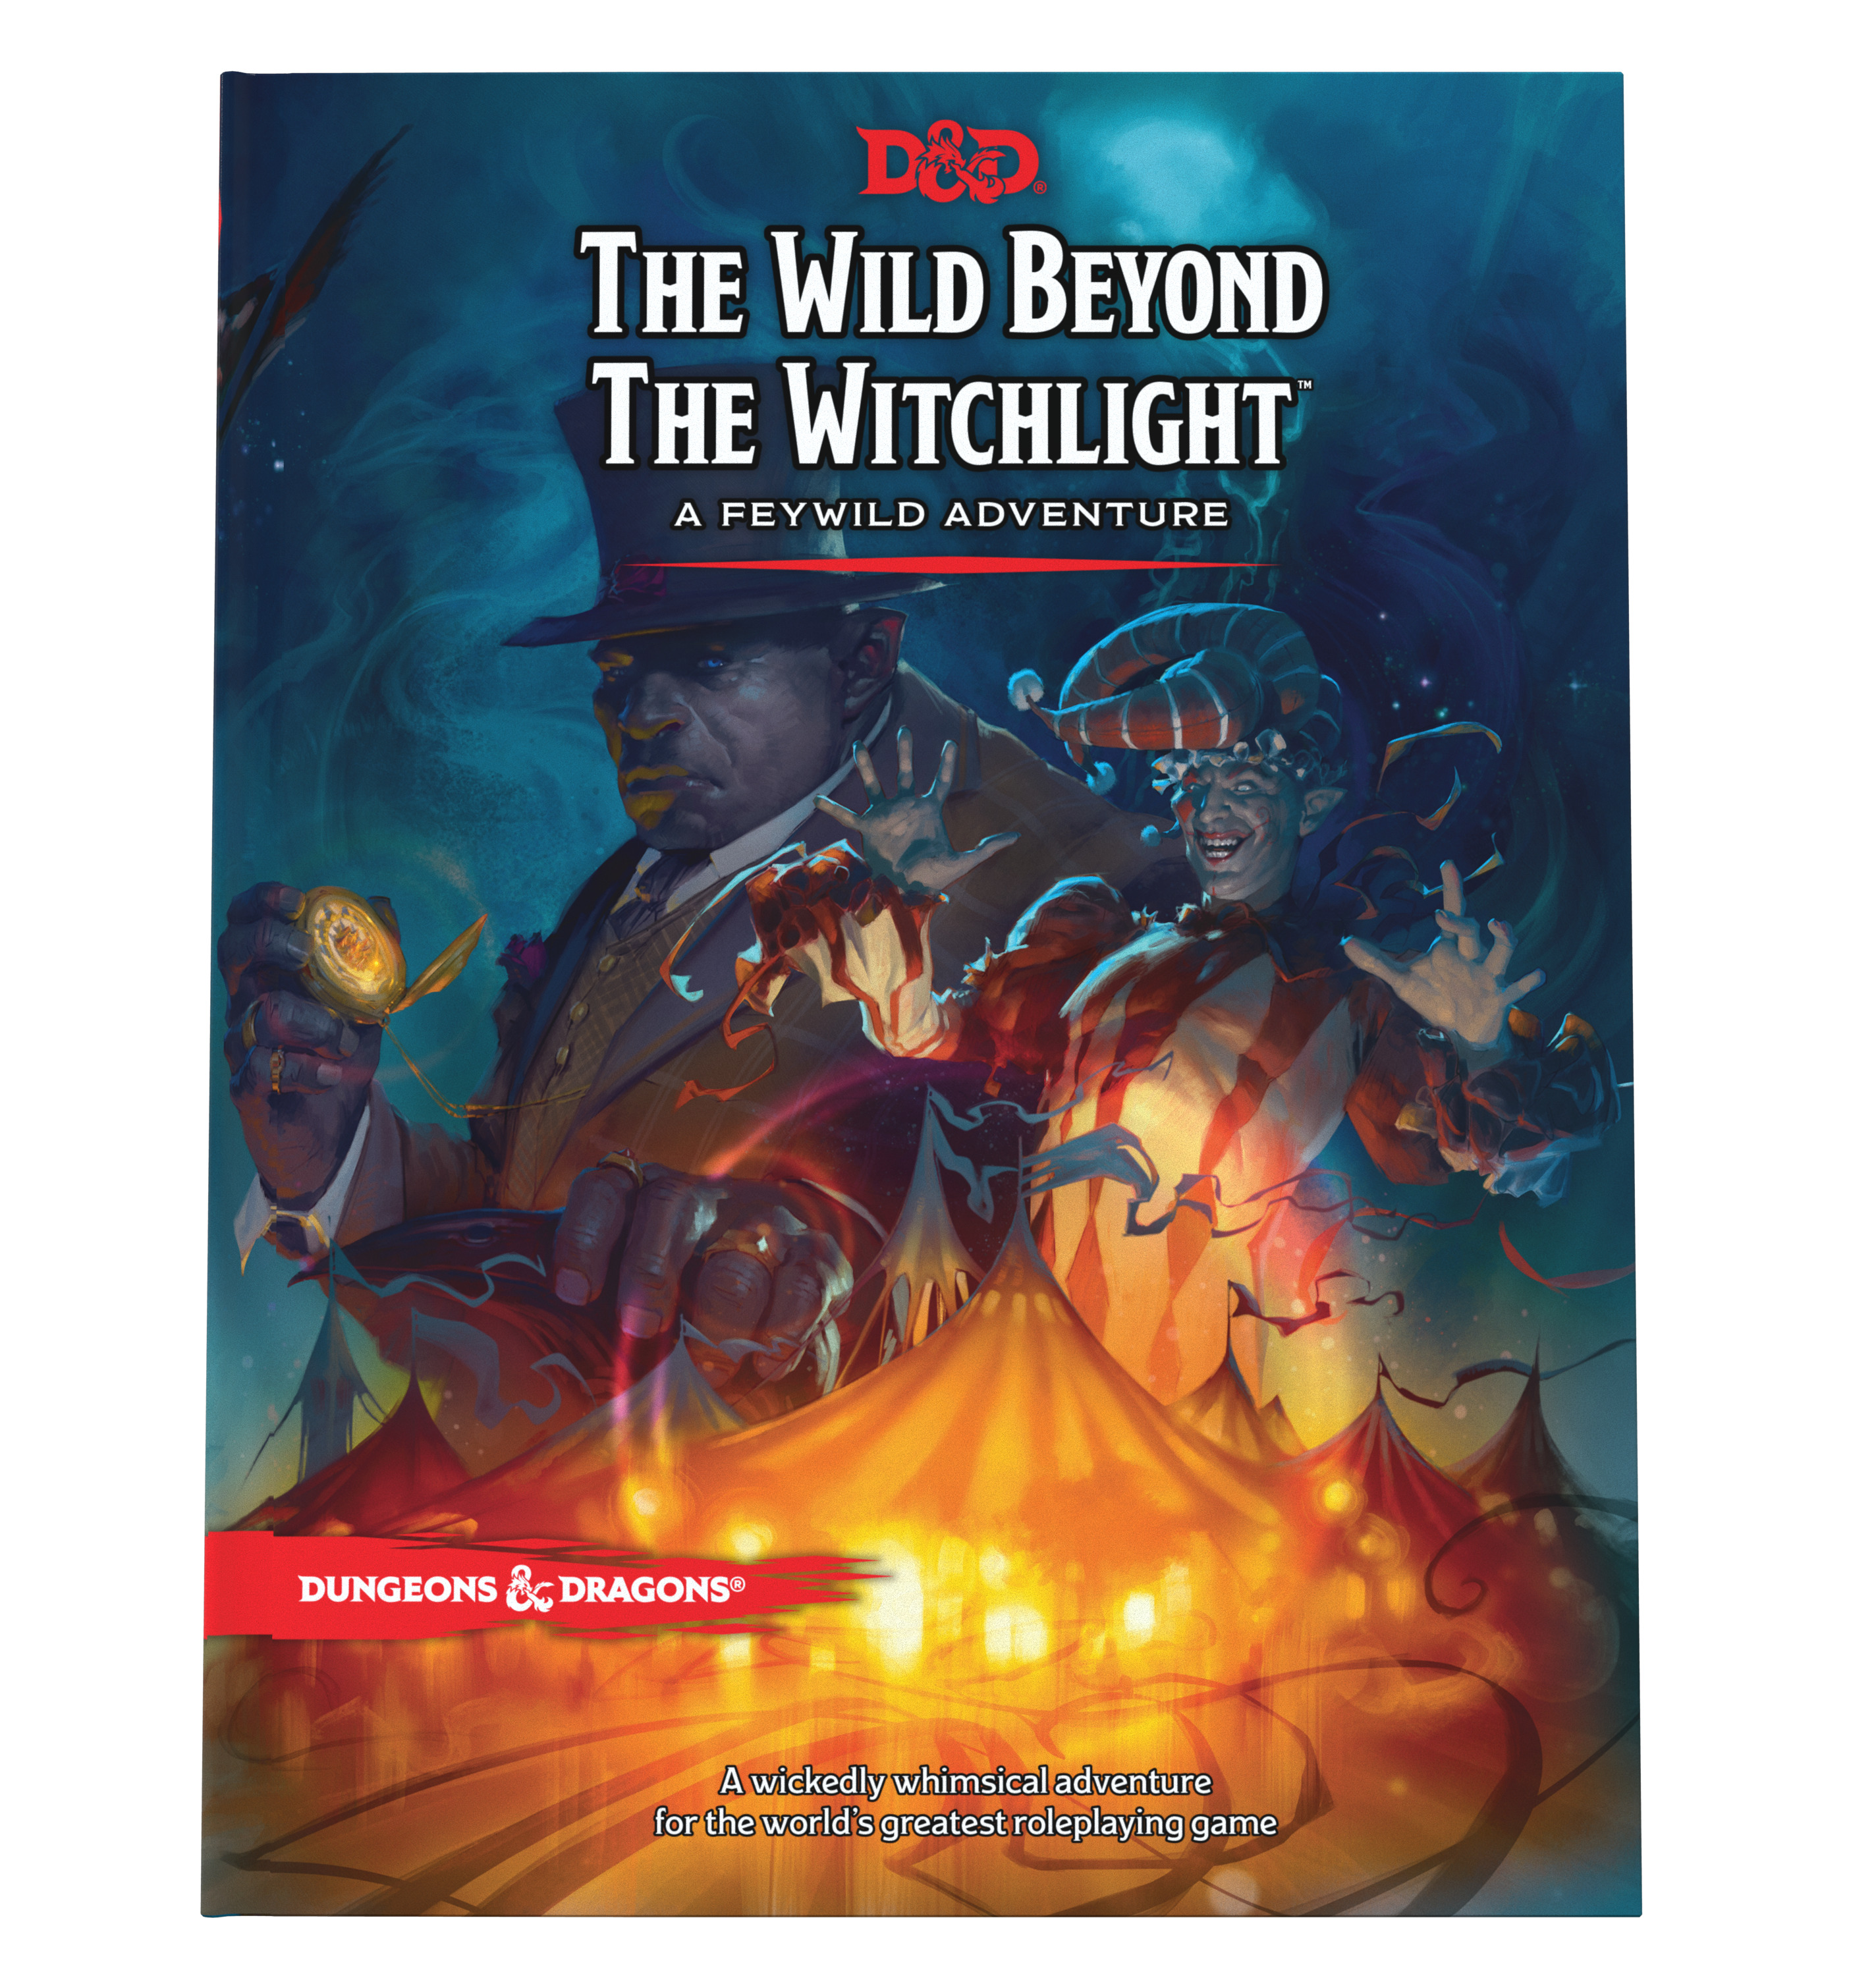 Dungeons & Dragons 5e The Wild Beyond The Witchlight